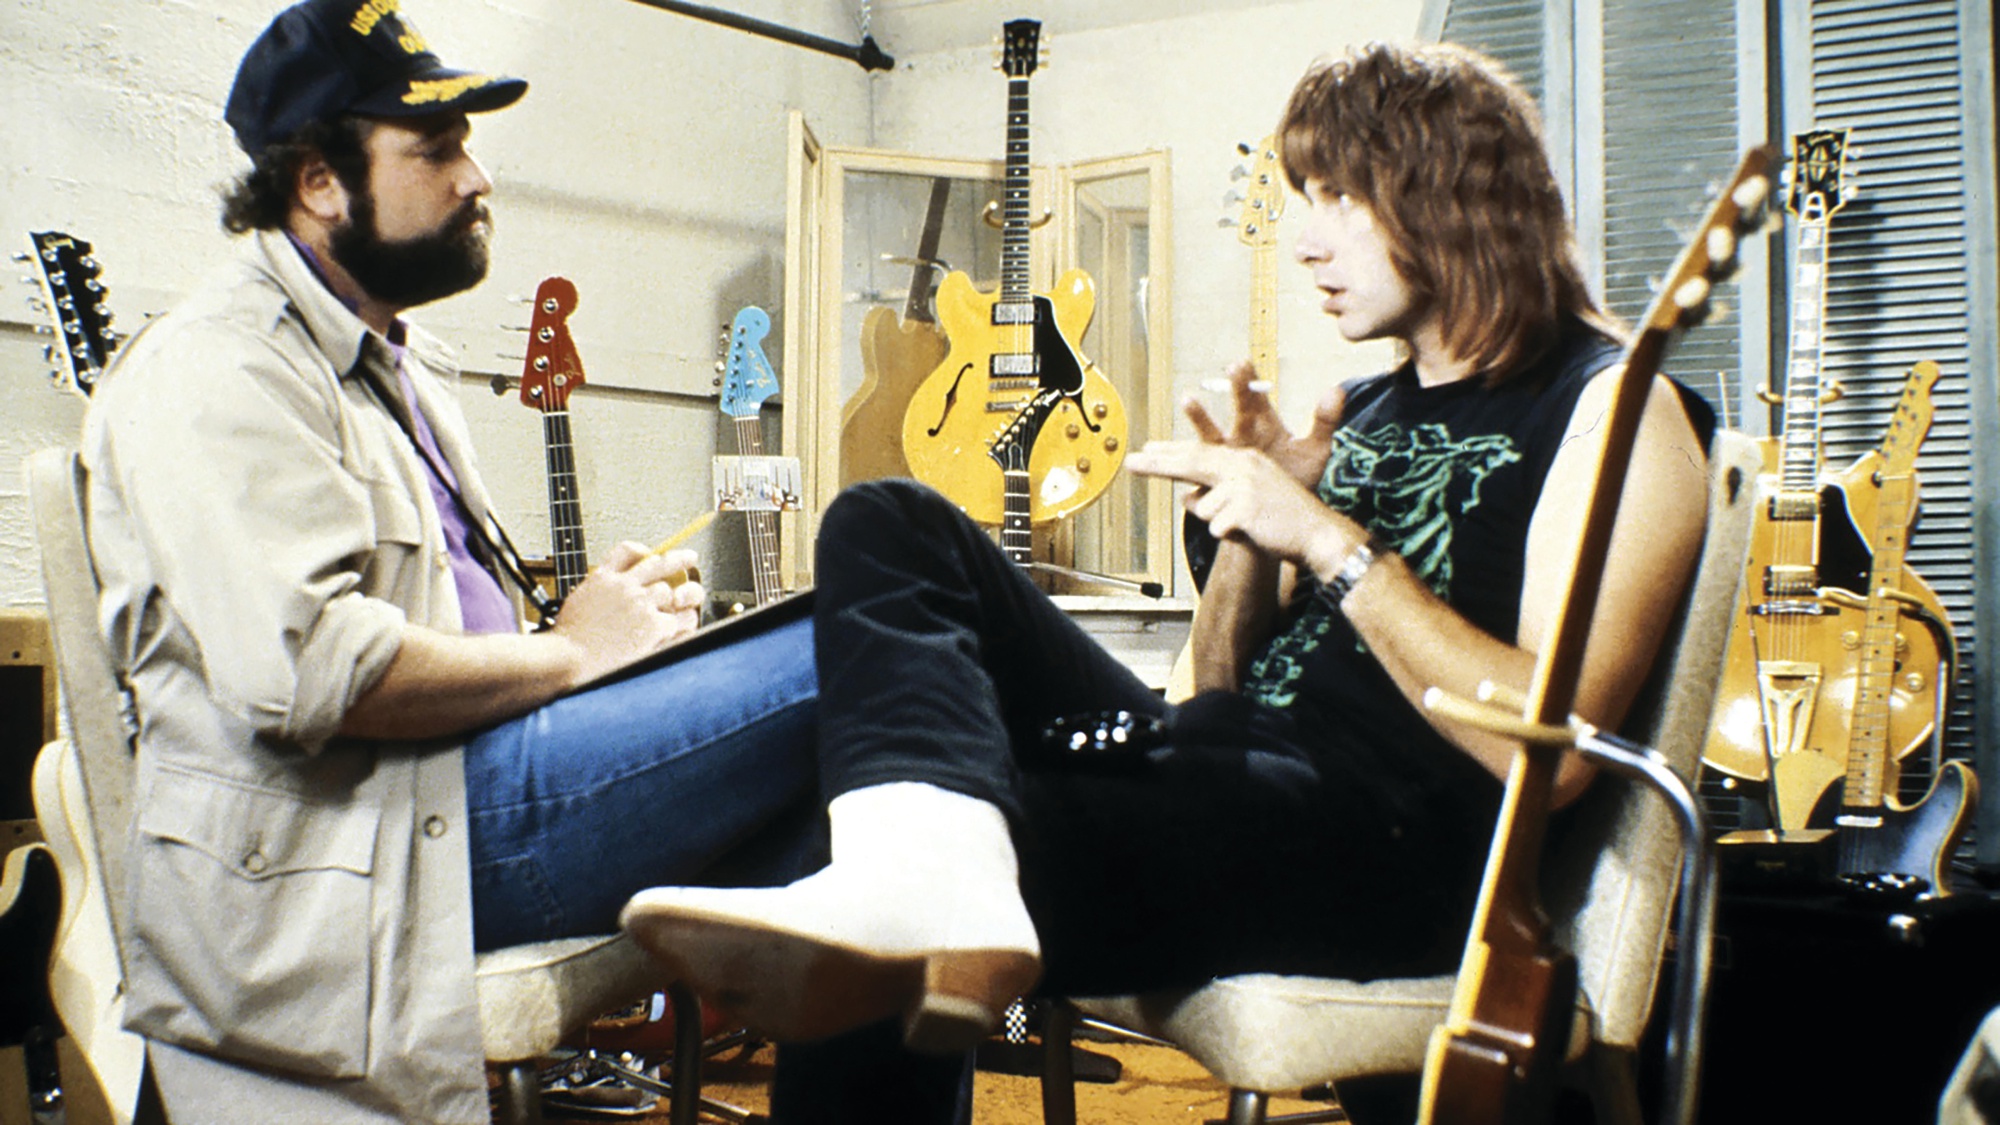 Rob Reiner and Christopher Guest in Rob Reiner's “This is Spinal Tap.”